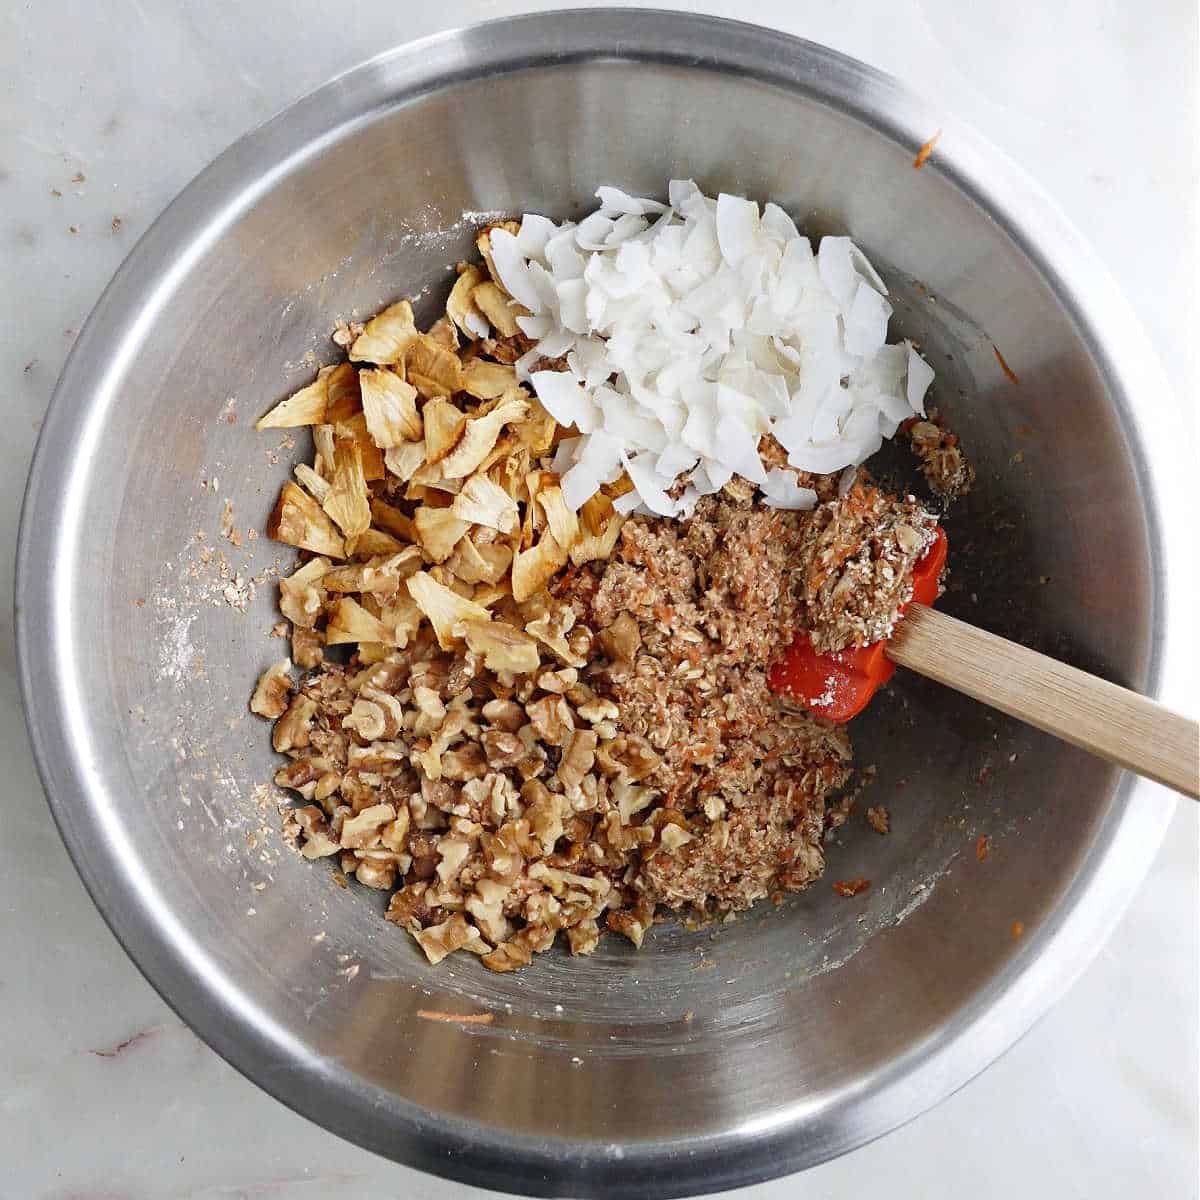 morning glory cookie batter with coconut, dried pineapple, and walnuts being folded into it